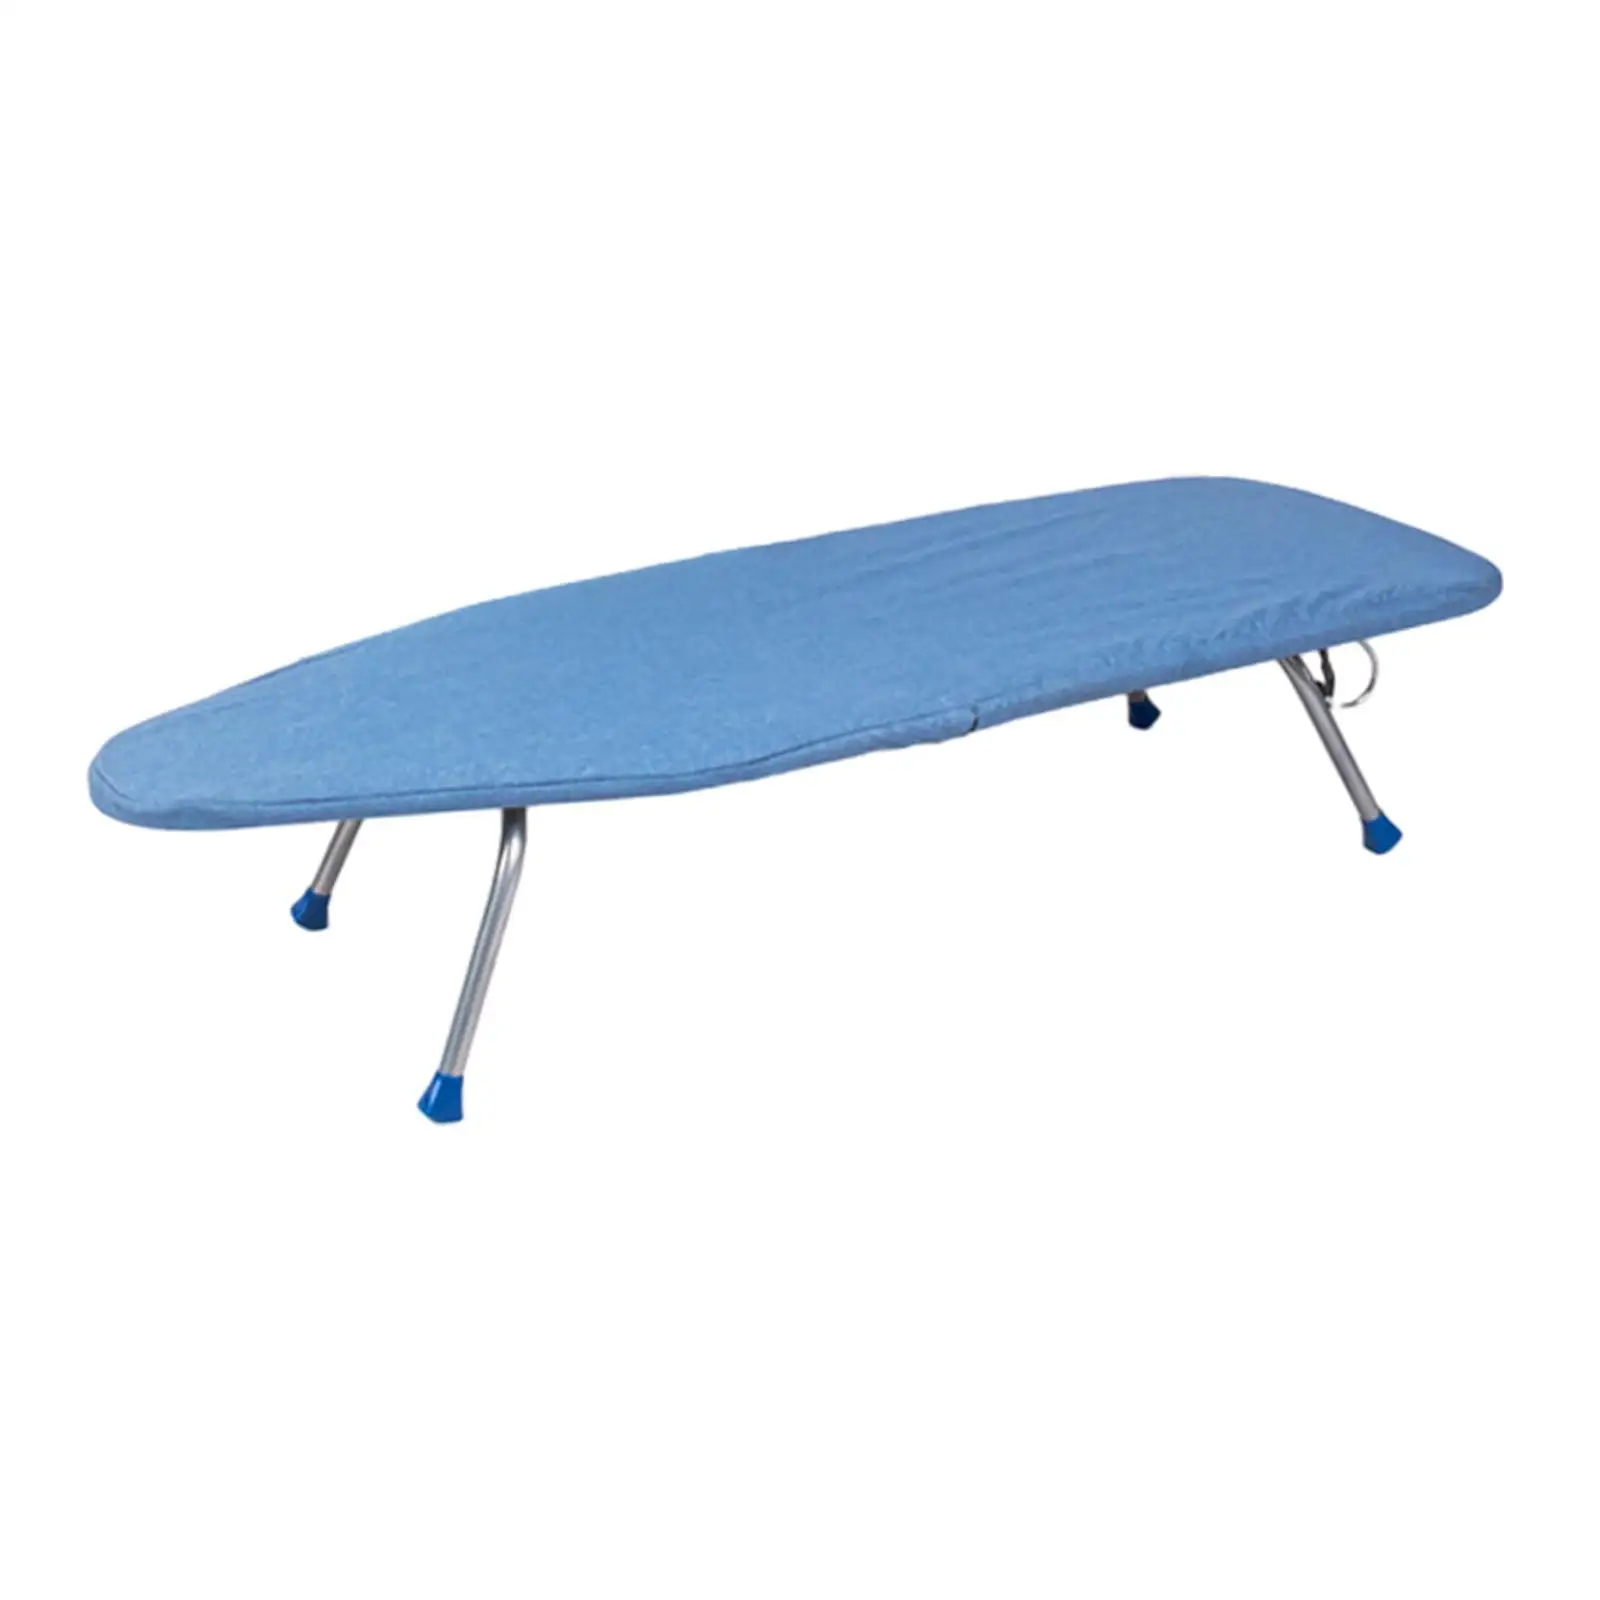 Tabletop Ironing Board Heat Resistant Cover Non Slip Feet Ironing Clothes Compact Portable Ironing Table for Laundry Room